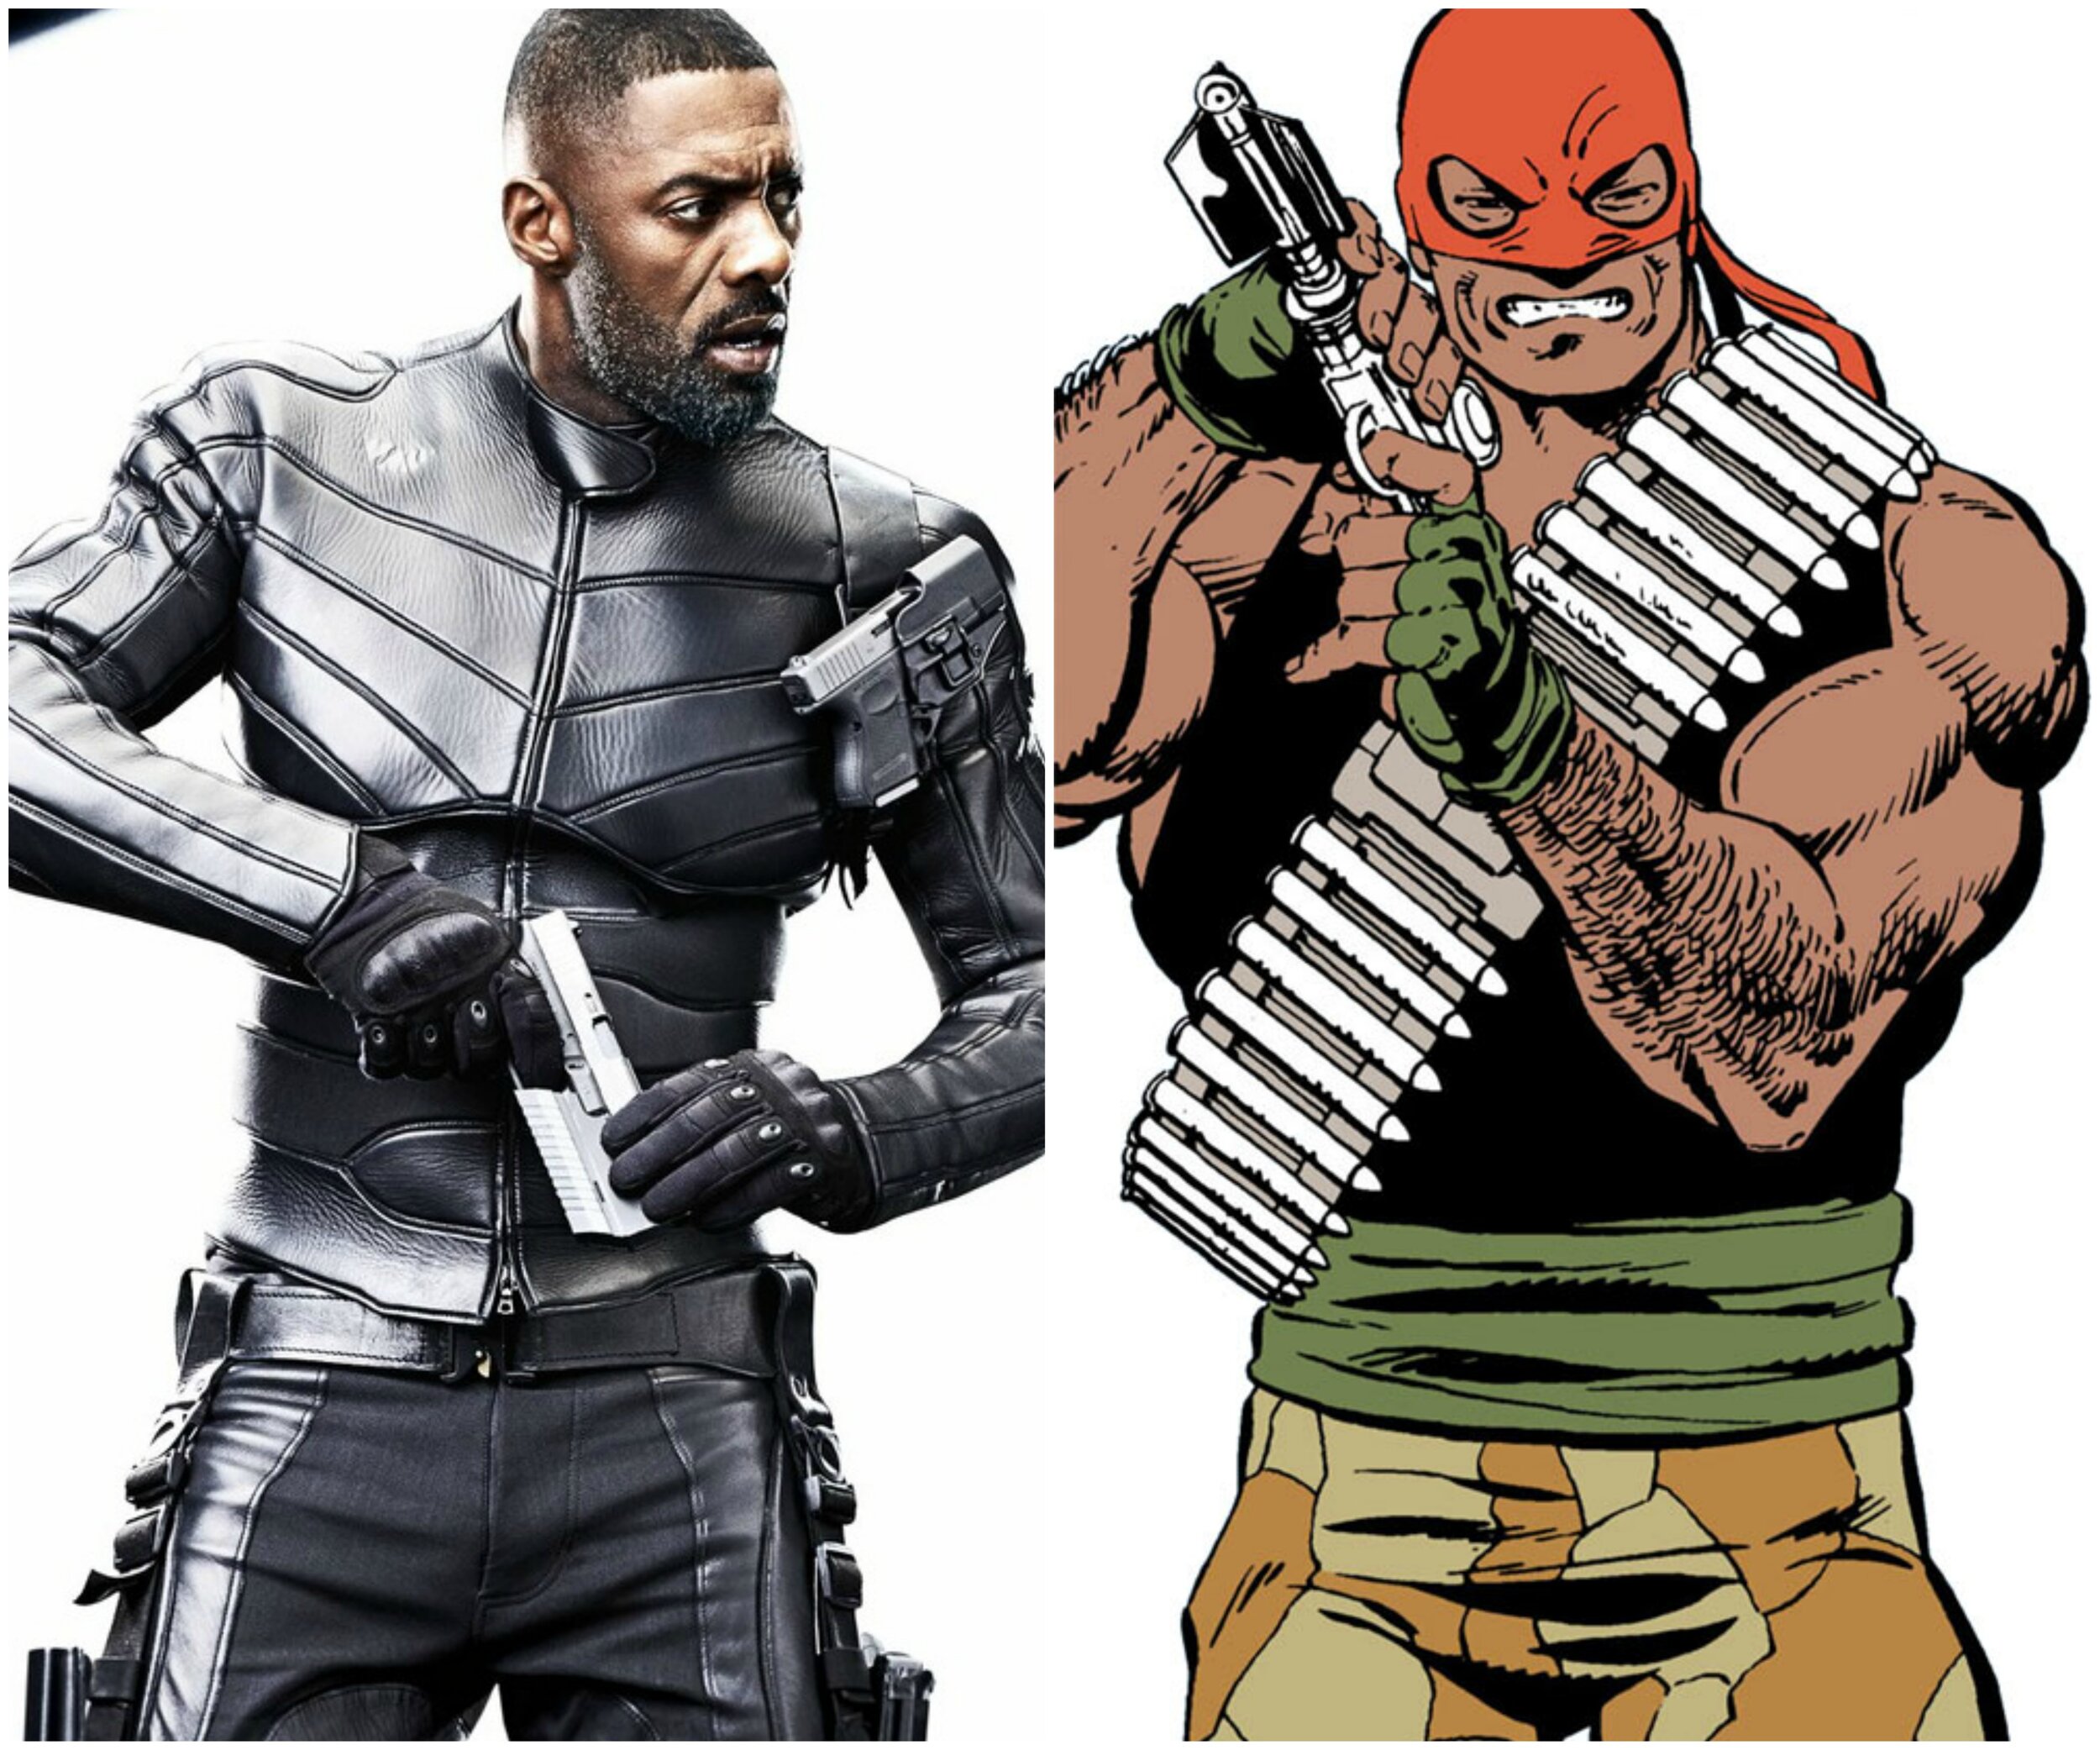 The Suicide Squad characters, Peter Capaldi and Idris Elba roles